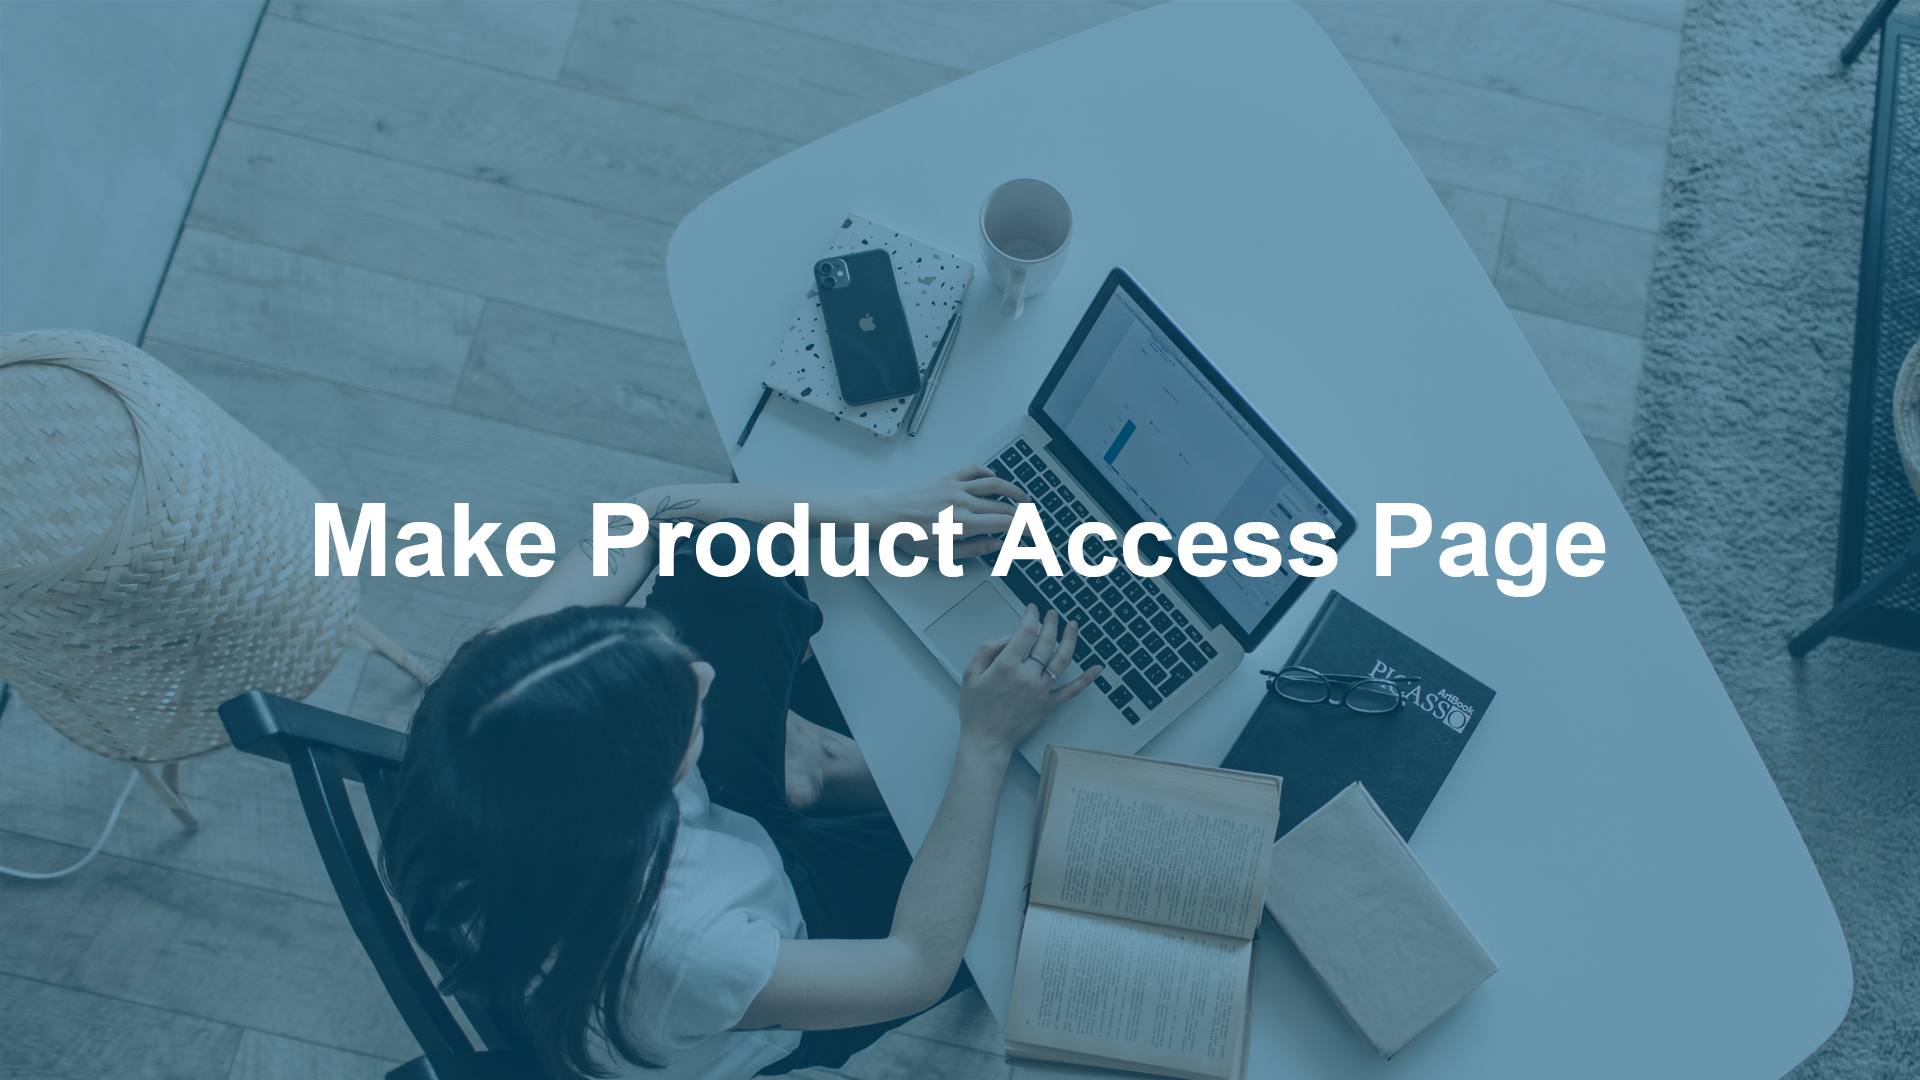 Make Product Access Page